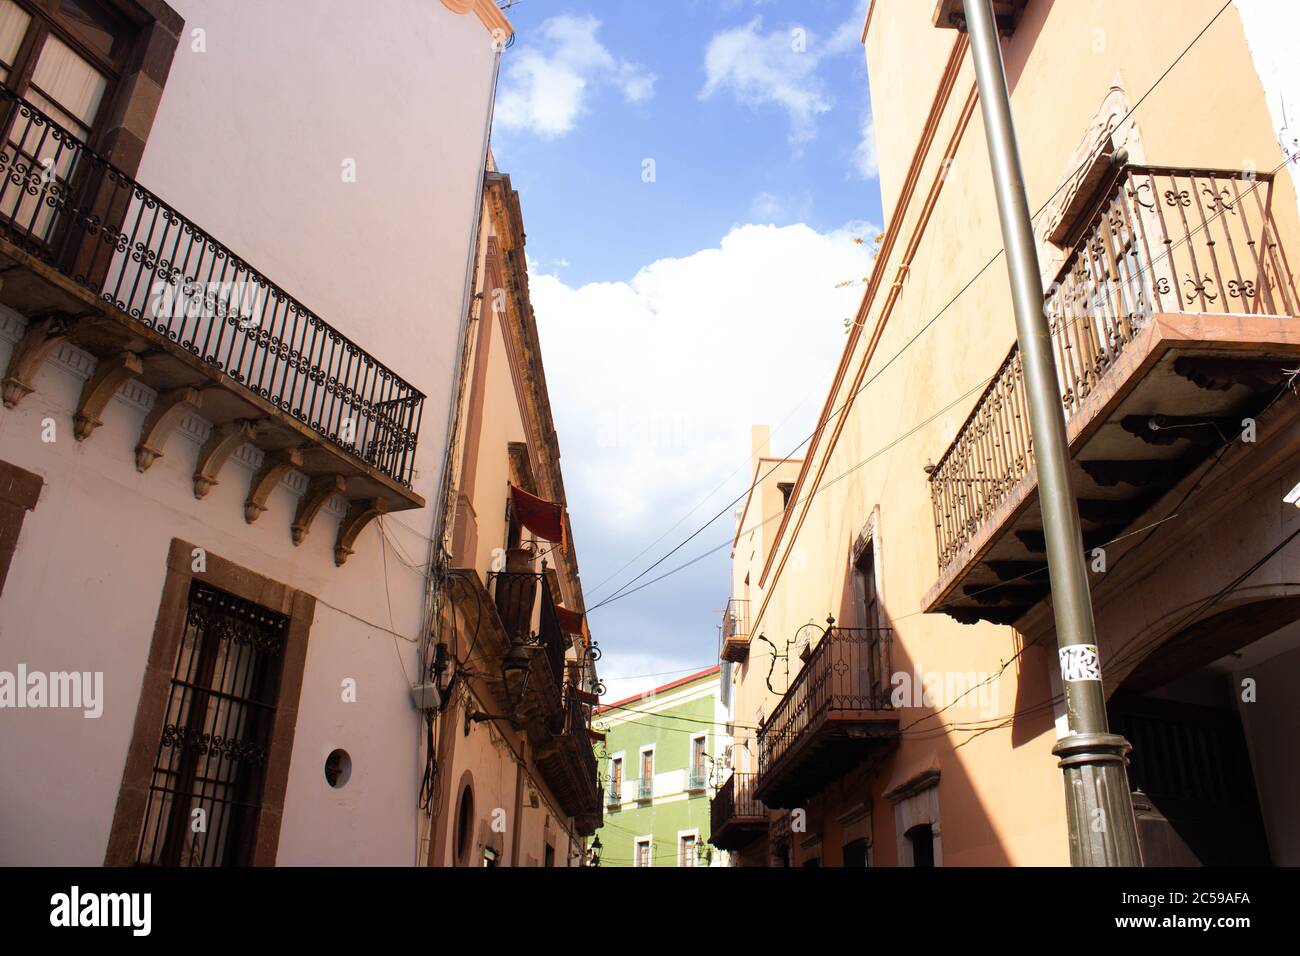 Queretaro, DownTown (Old City and colorful) Stock Photo